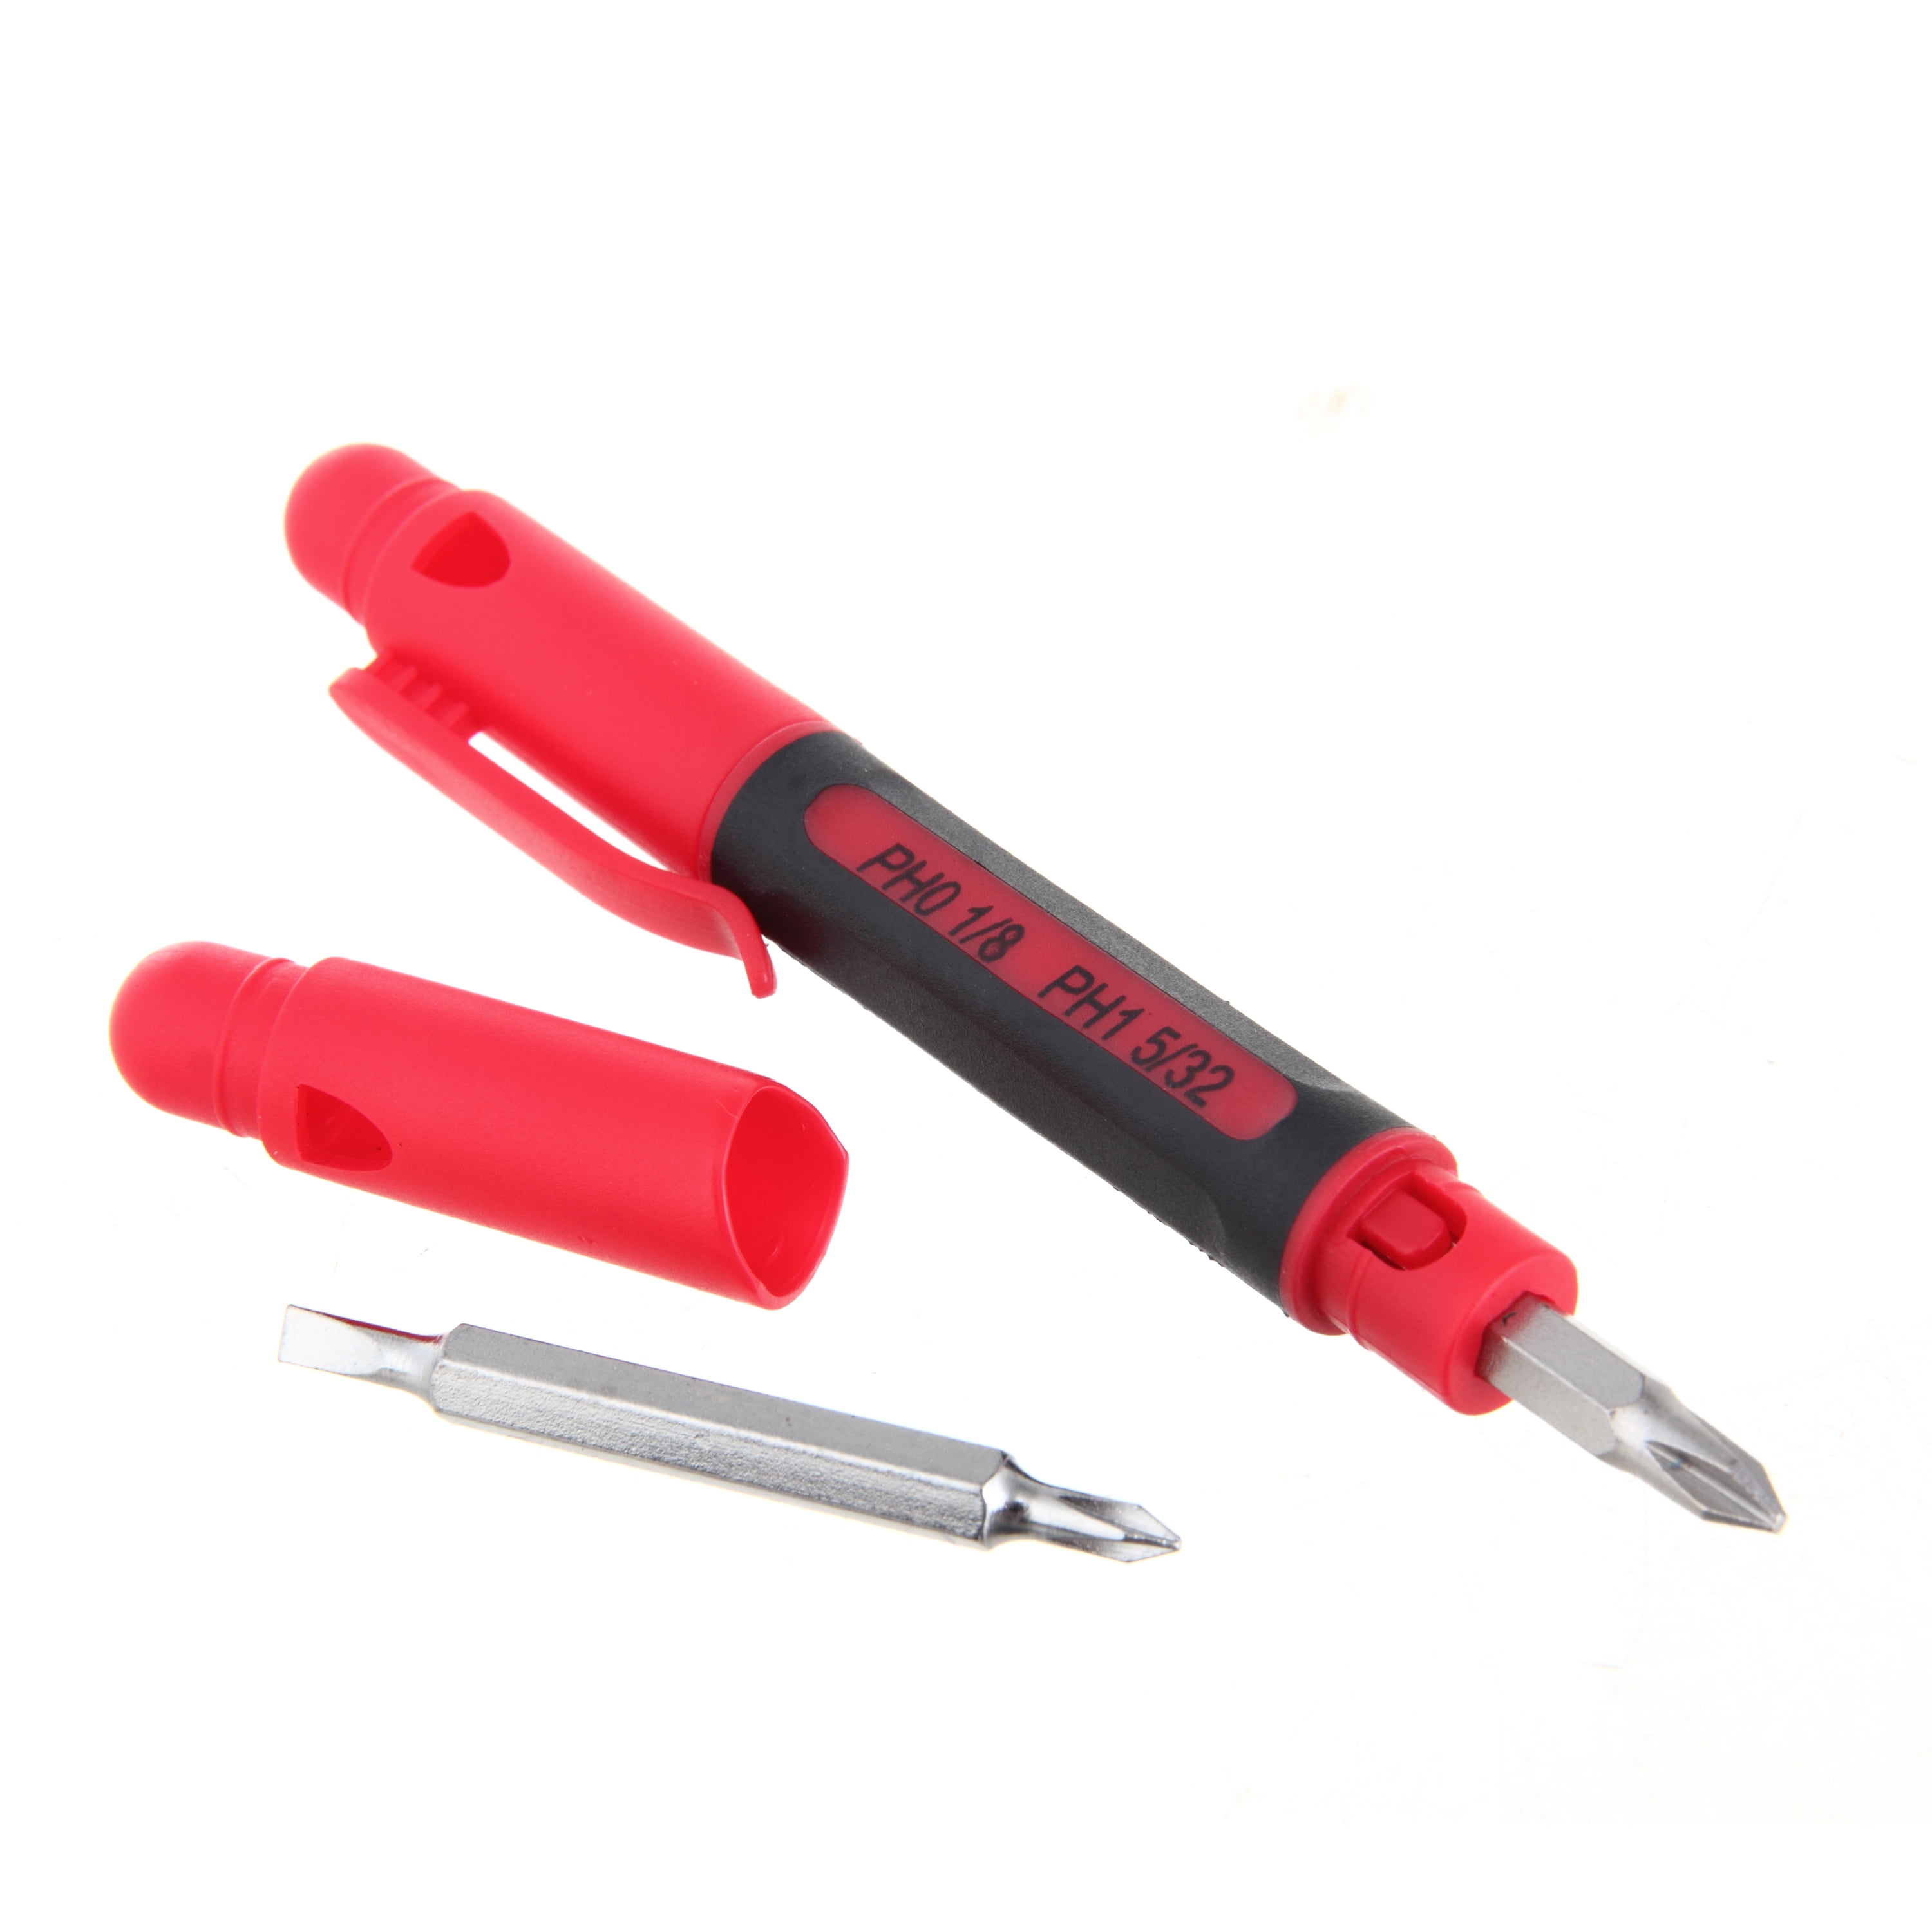 PRECISION DOUBLE ENDED HANDY POCKET PEN SCREWDRIVER Small Flat/Slotted/Phillips